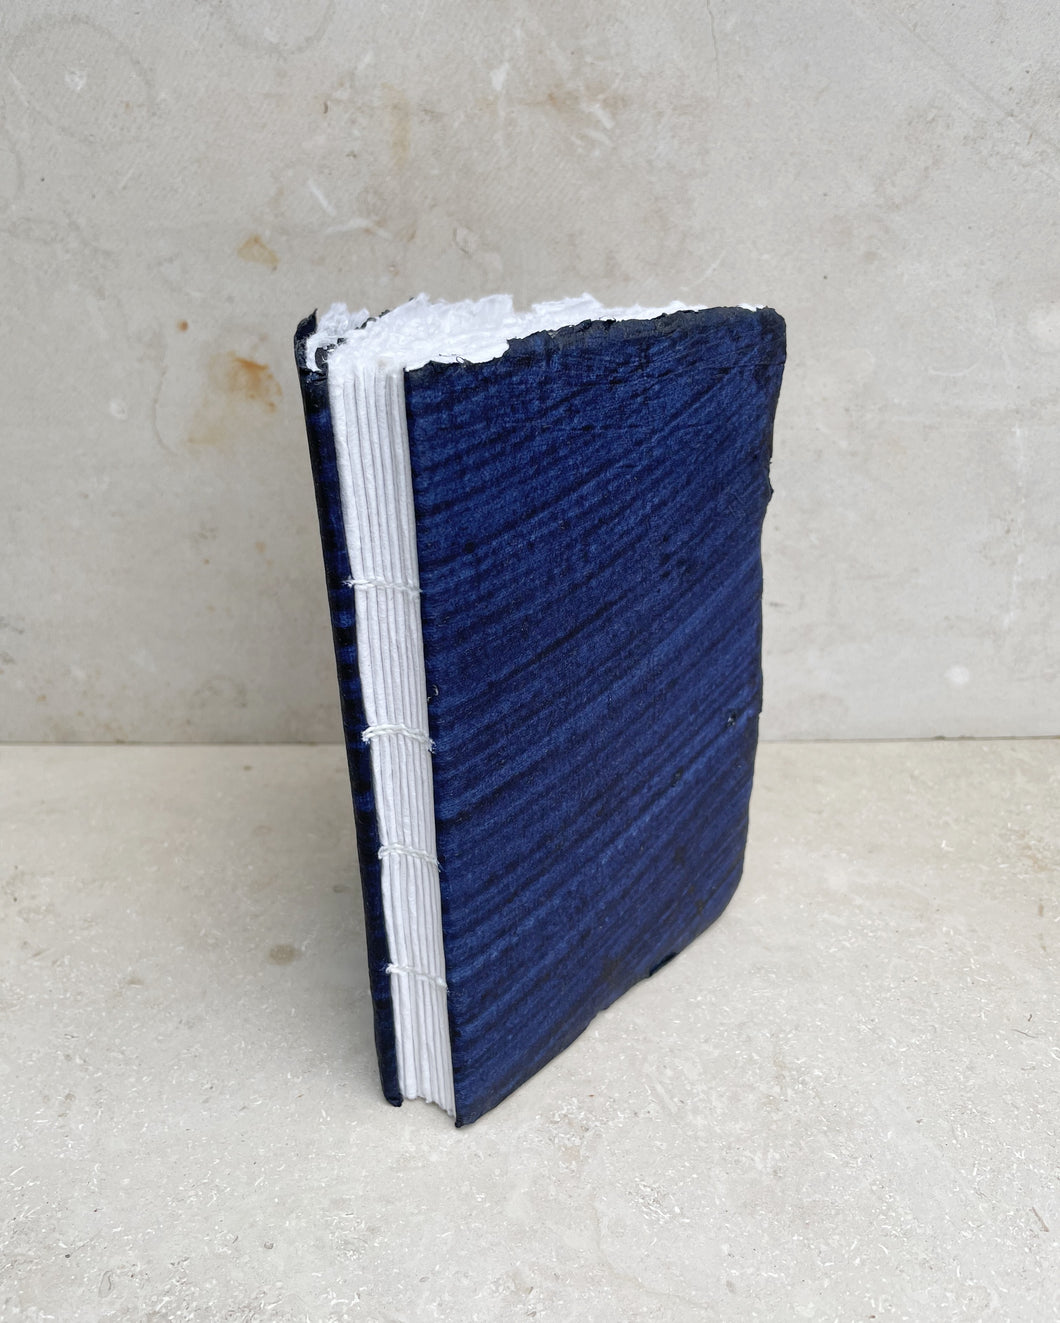 Paper book, handmade by remade cotton paper